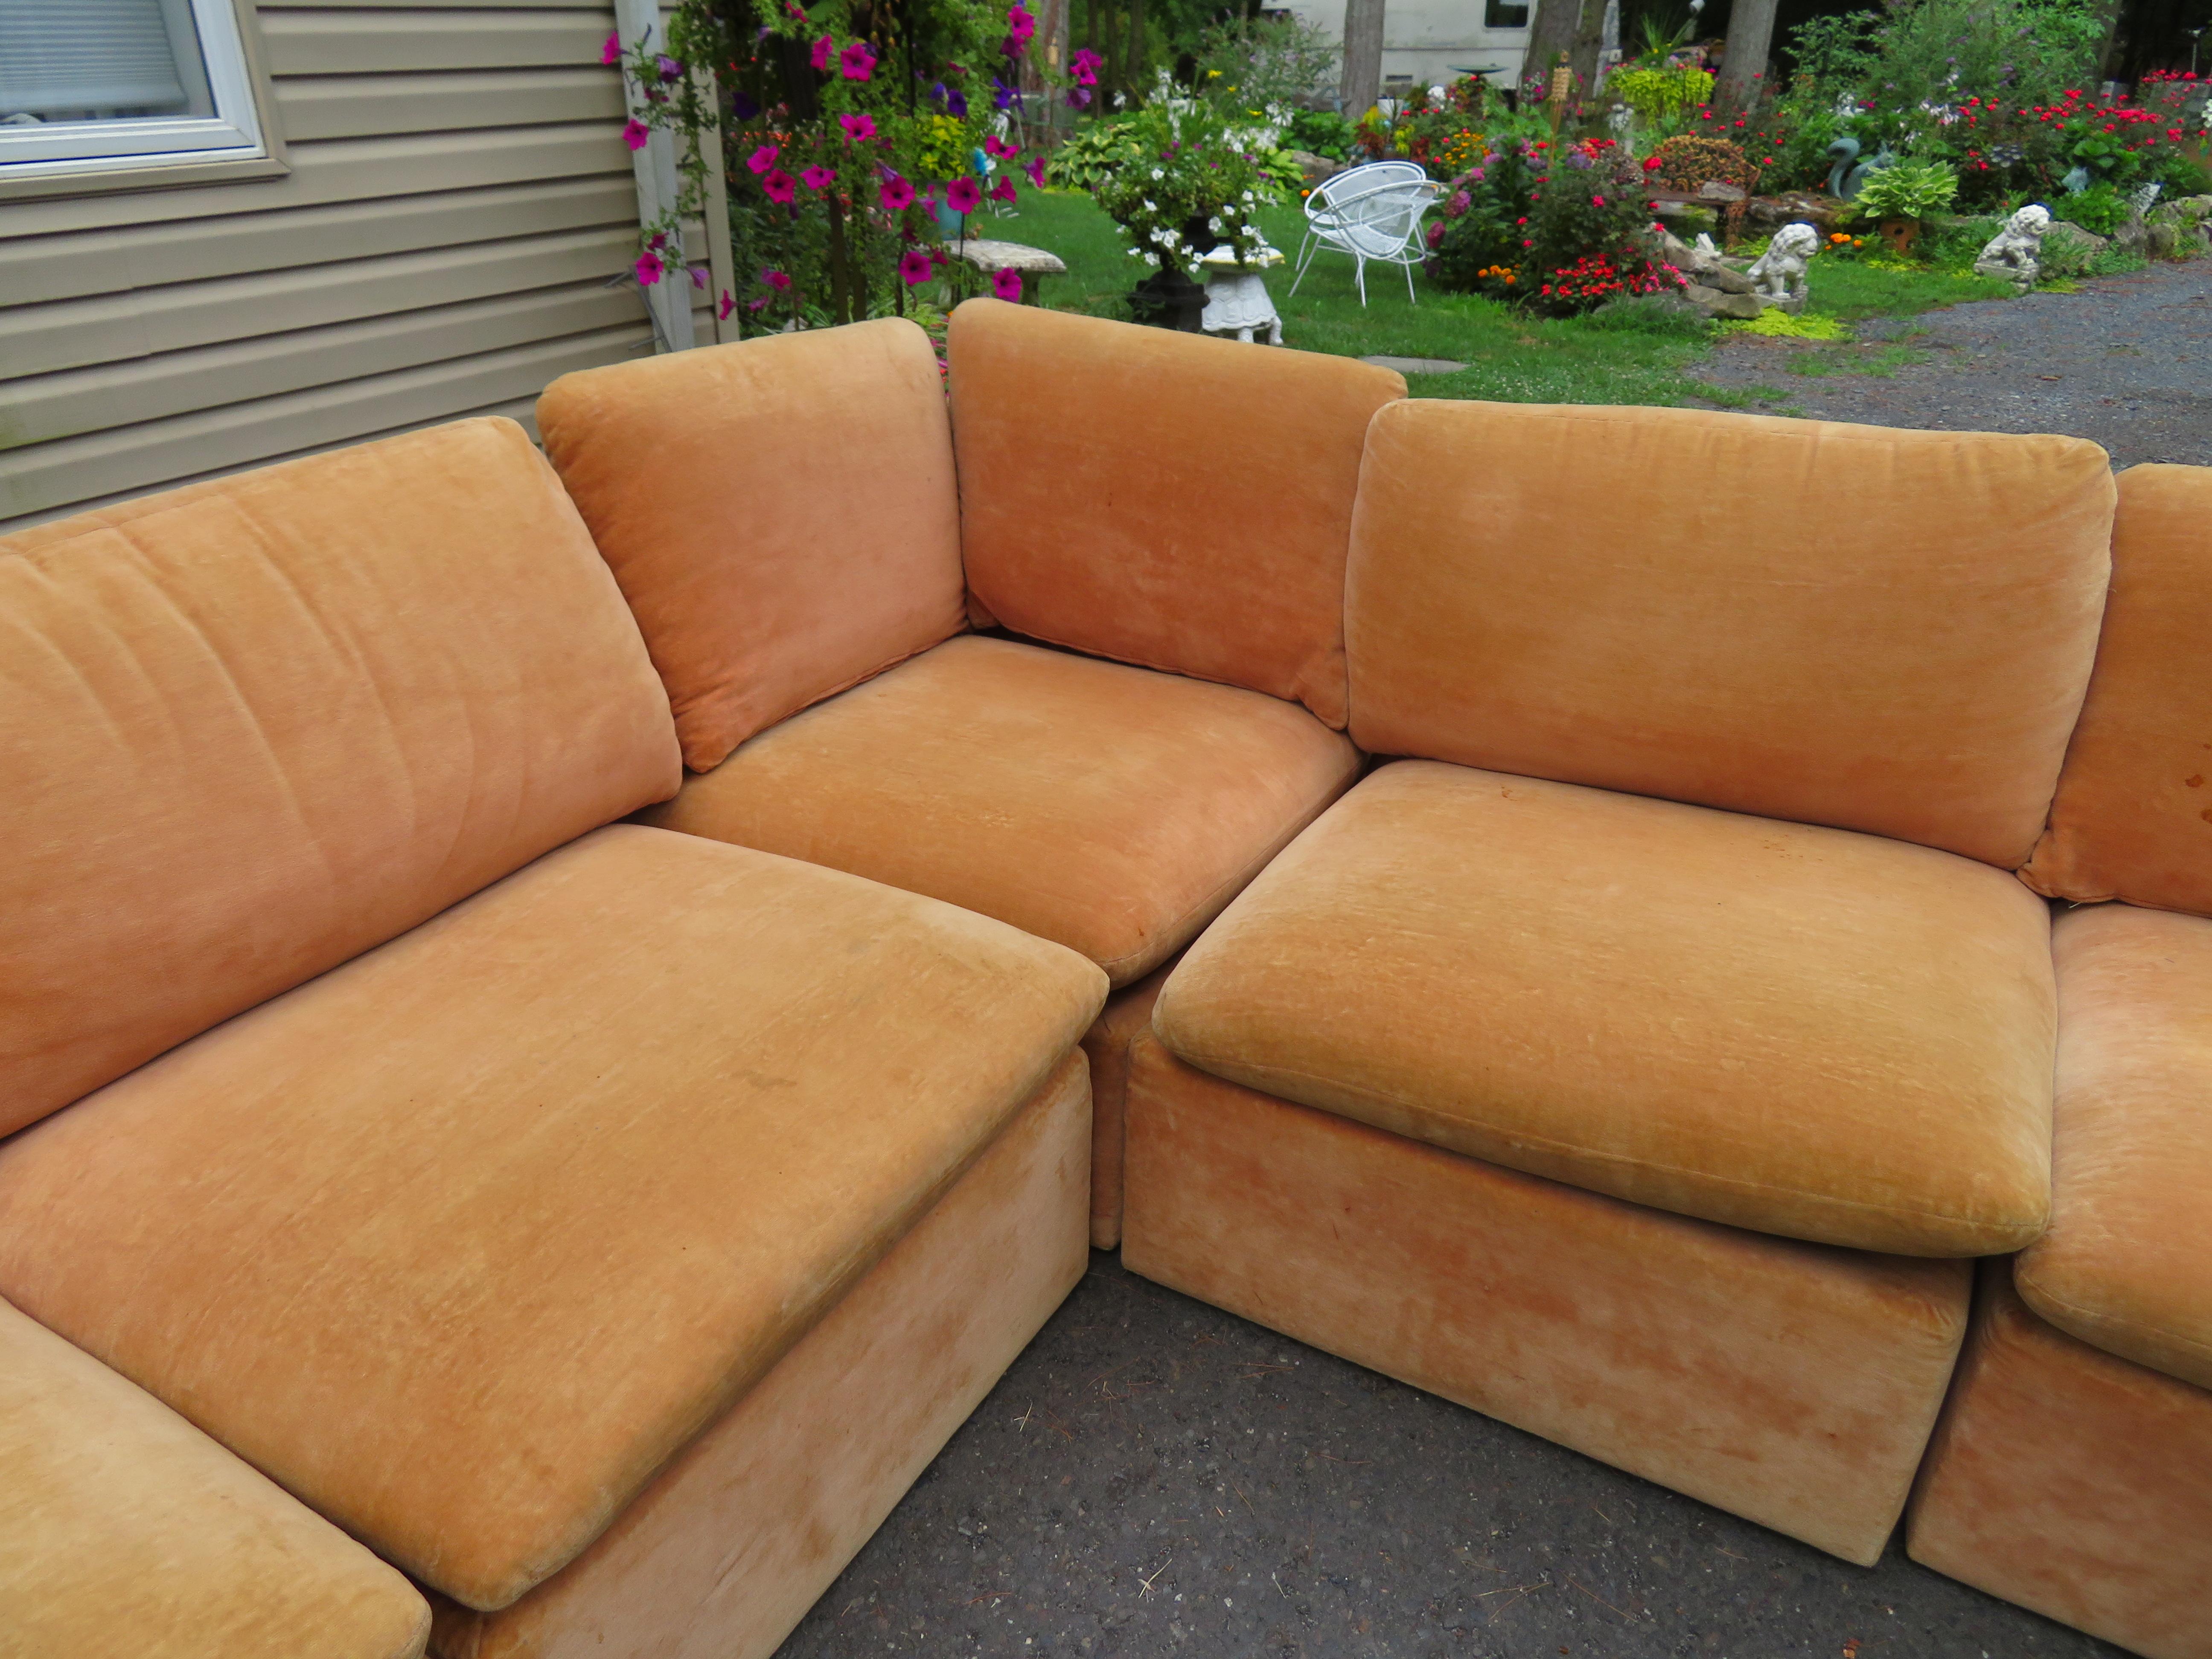 Upholstery Unusual Milo Baughman Thayer Coggin 6 Piece Curved Back Cube Sectional Sofa For Sale